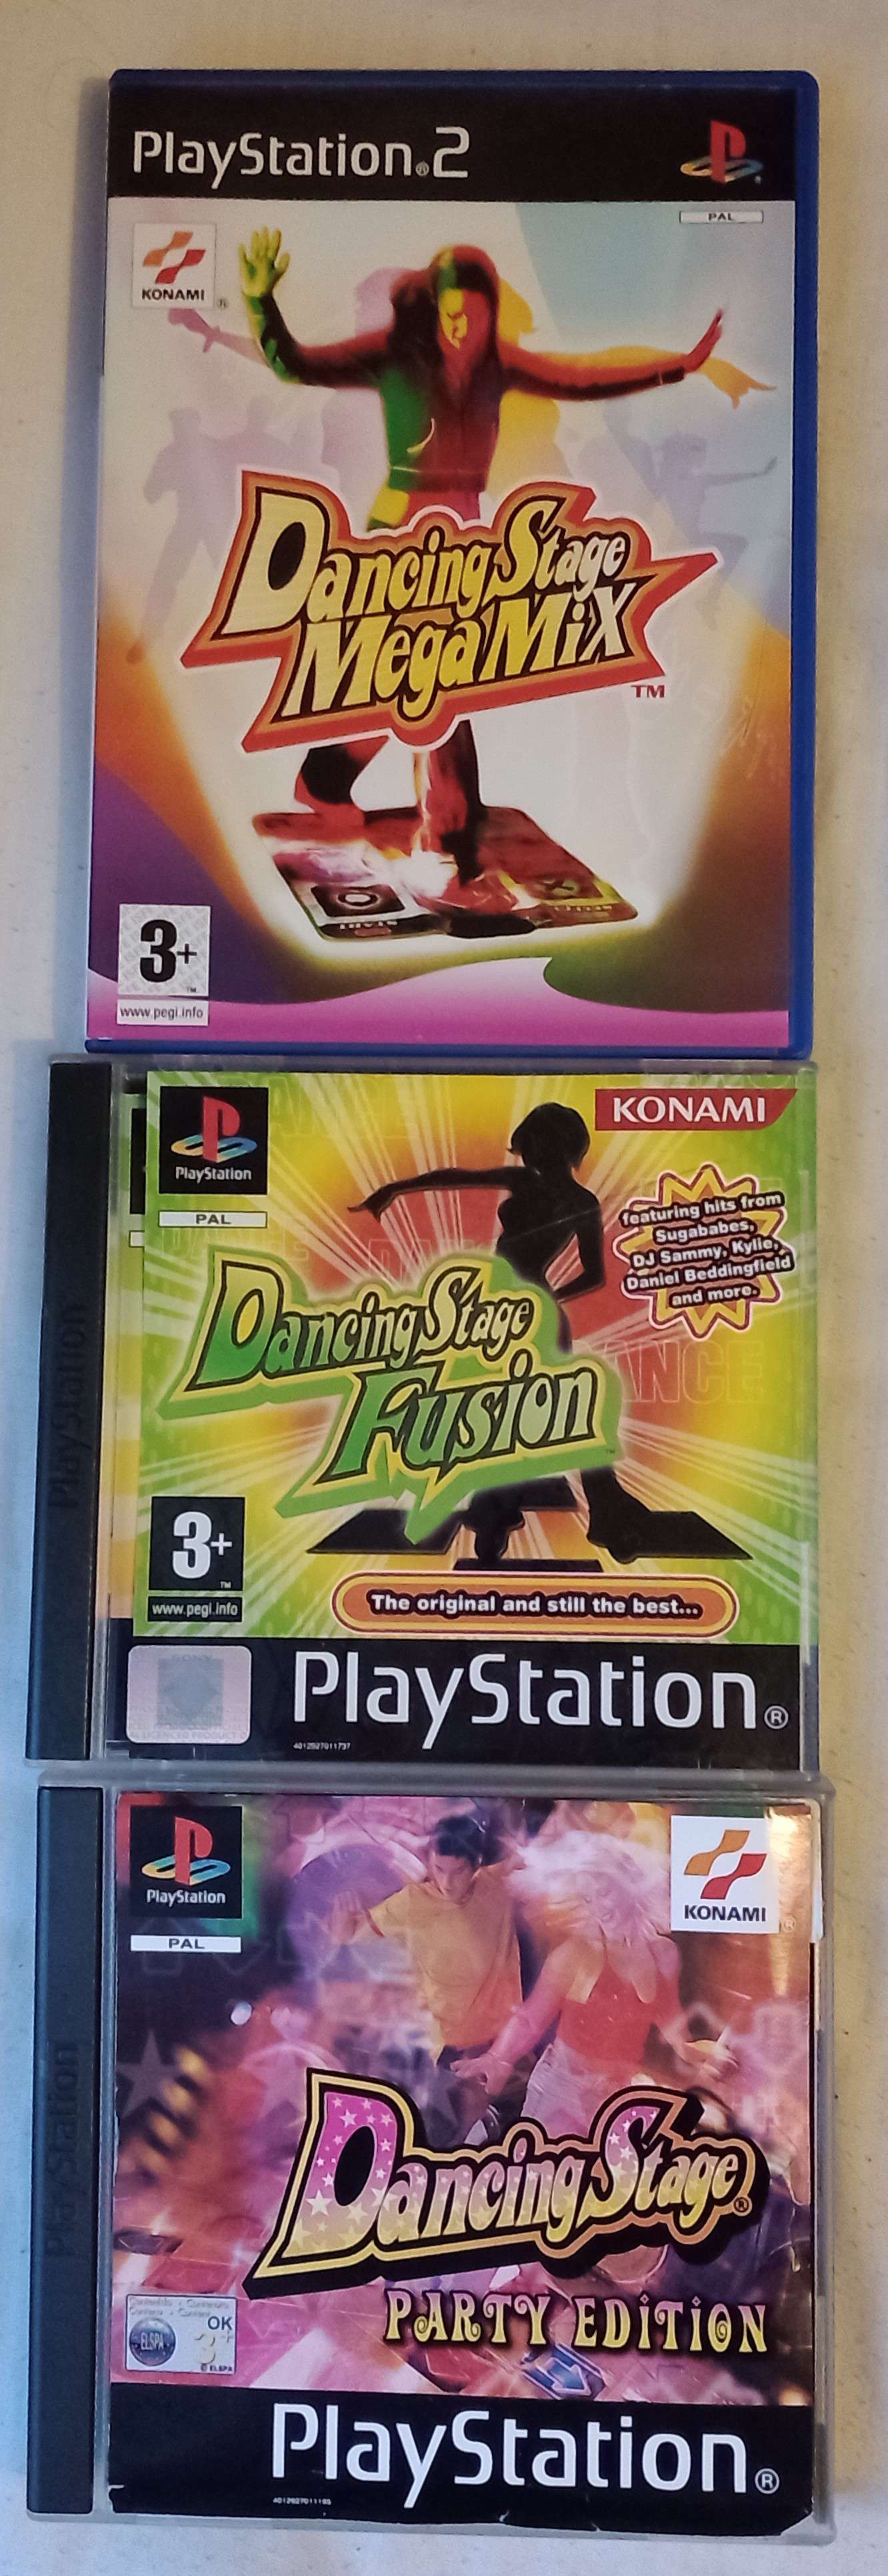 three dancing stage games lined up. in order: dancing stage megamix for the PS2, dancing stage party edition for PS1, and dancing stage fusion for PS1.